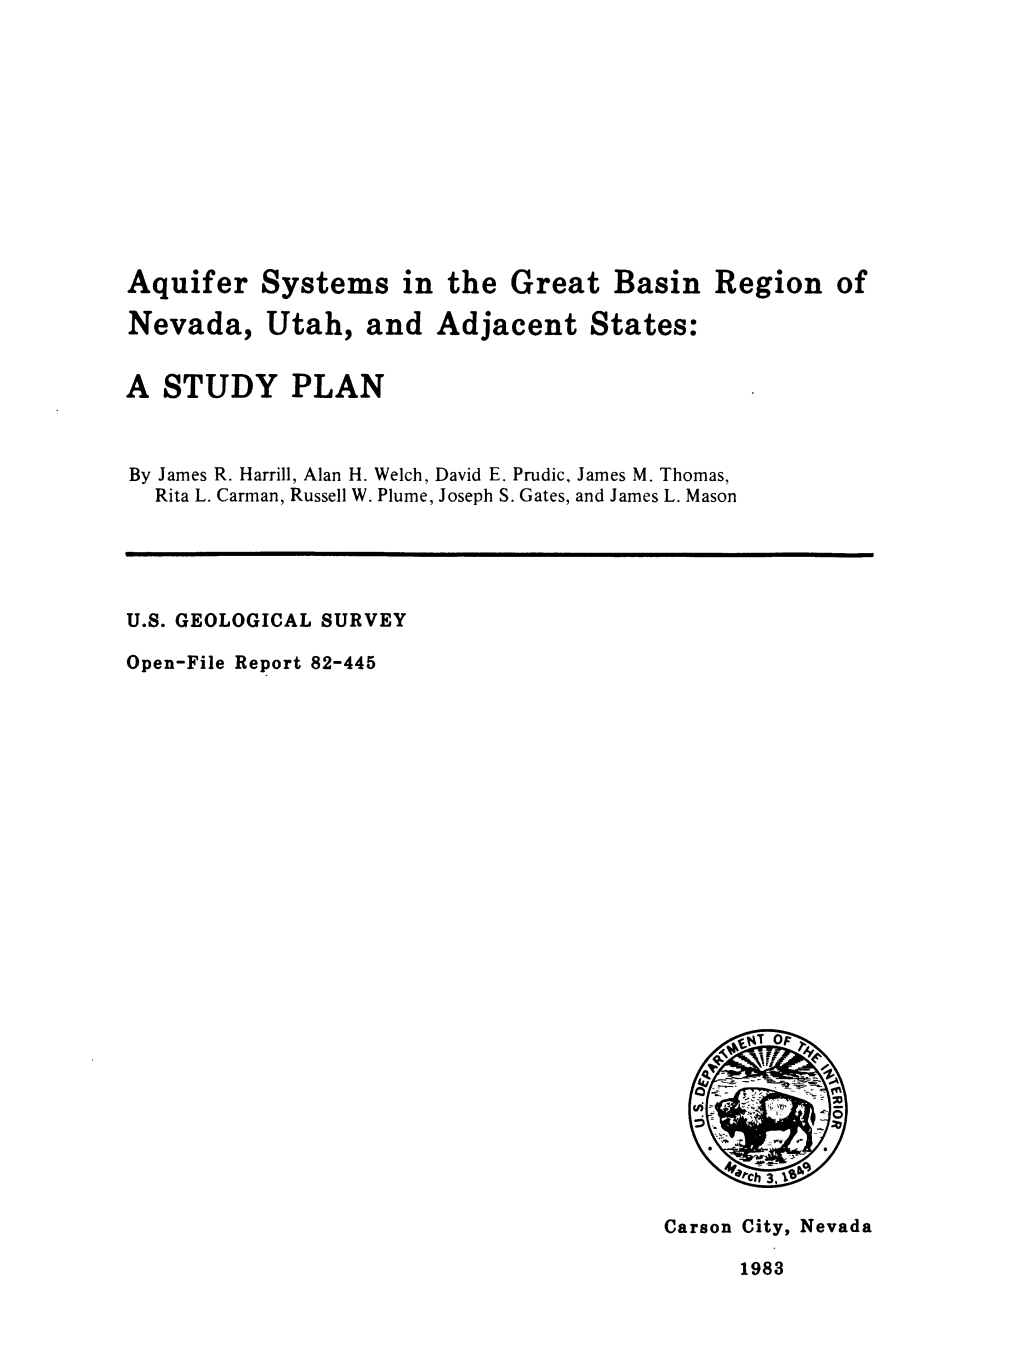 Aquifer Systems in the Great Basin Region of Nevada, Utah, and Adjacent States: a STUDY PLAN